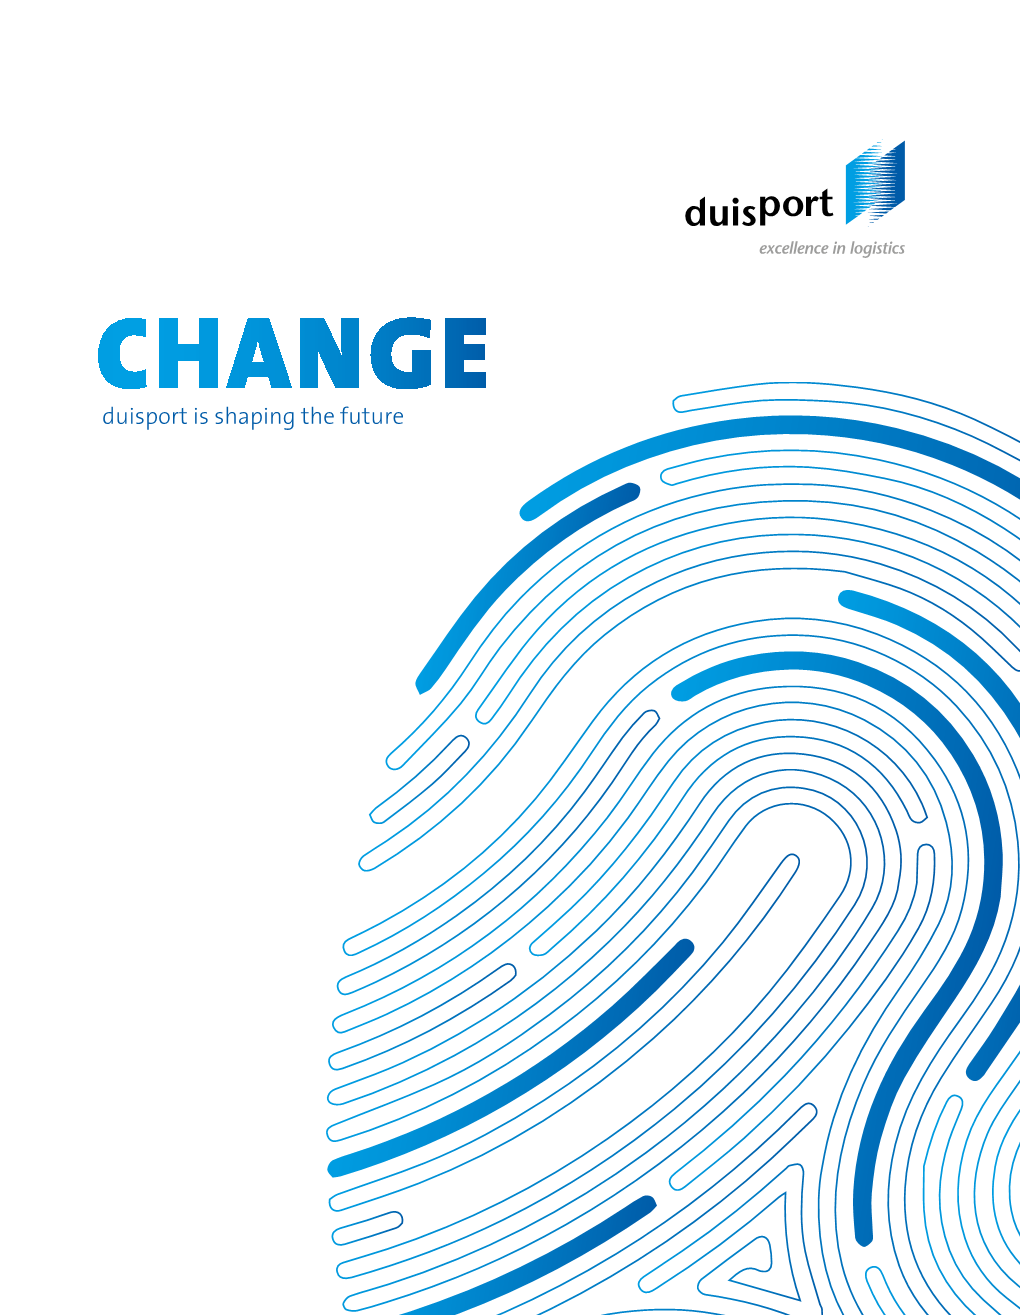 CHANGE Duisport Is Shaping the Future Duisport Group, Key Figures2015 –2017 (In EUR Million) Change in %1 2015 2016 2017 17/16 Sales Revenue2 (Incl